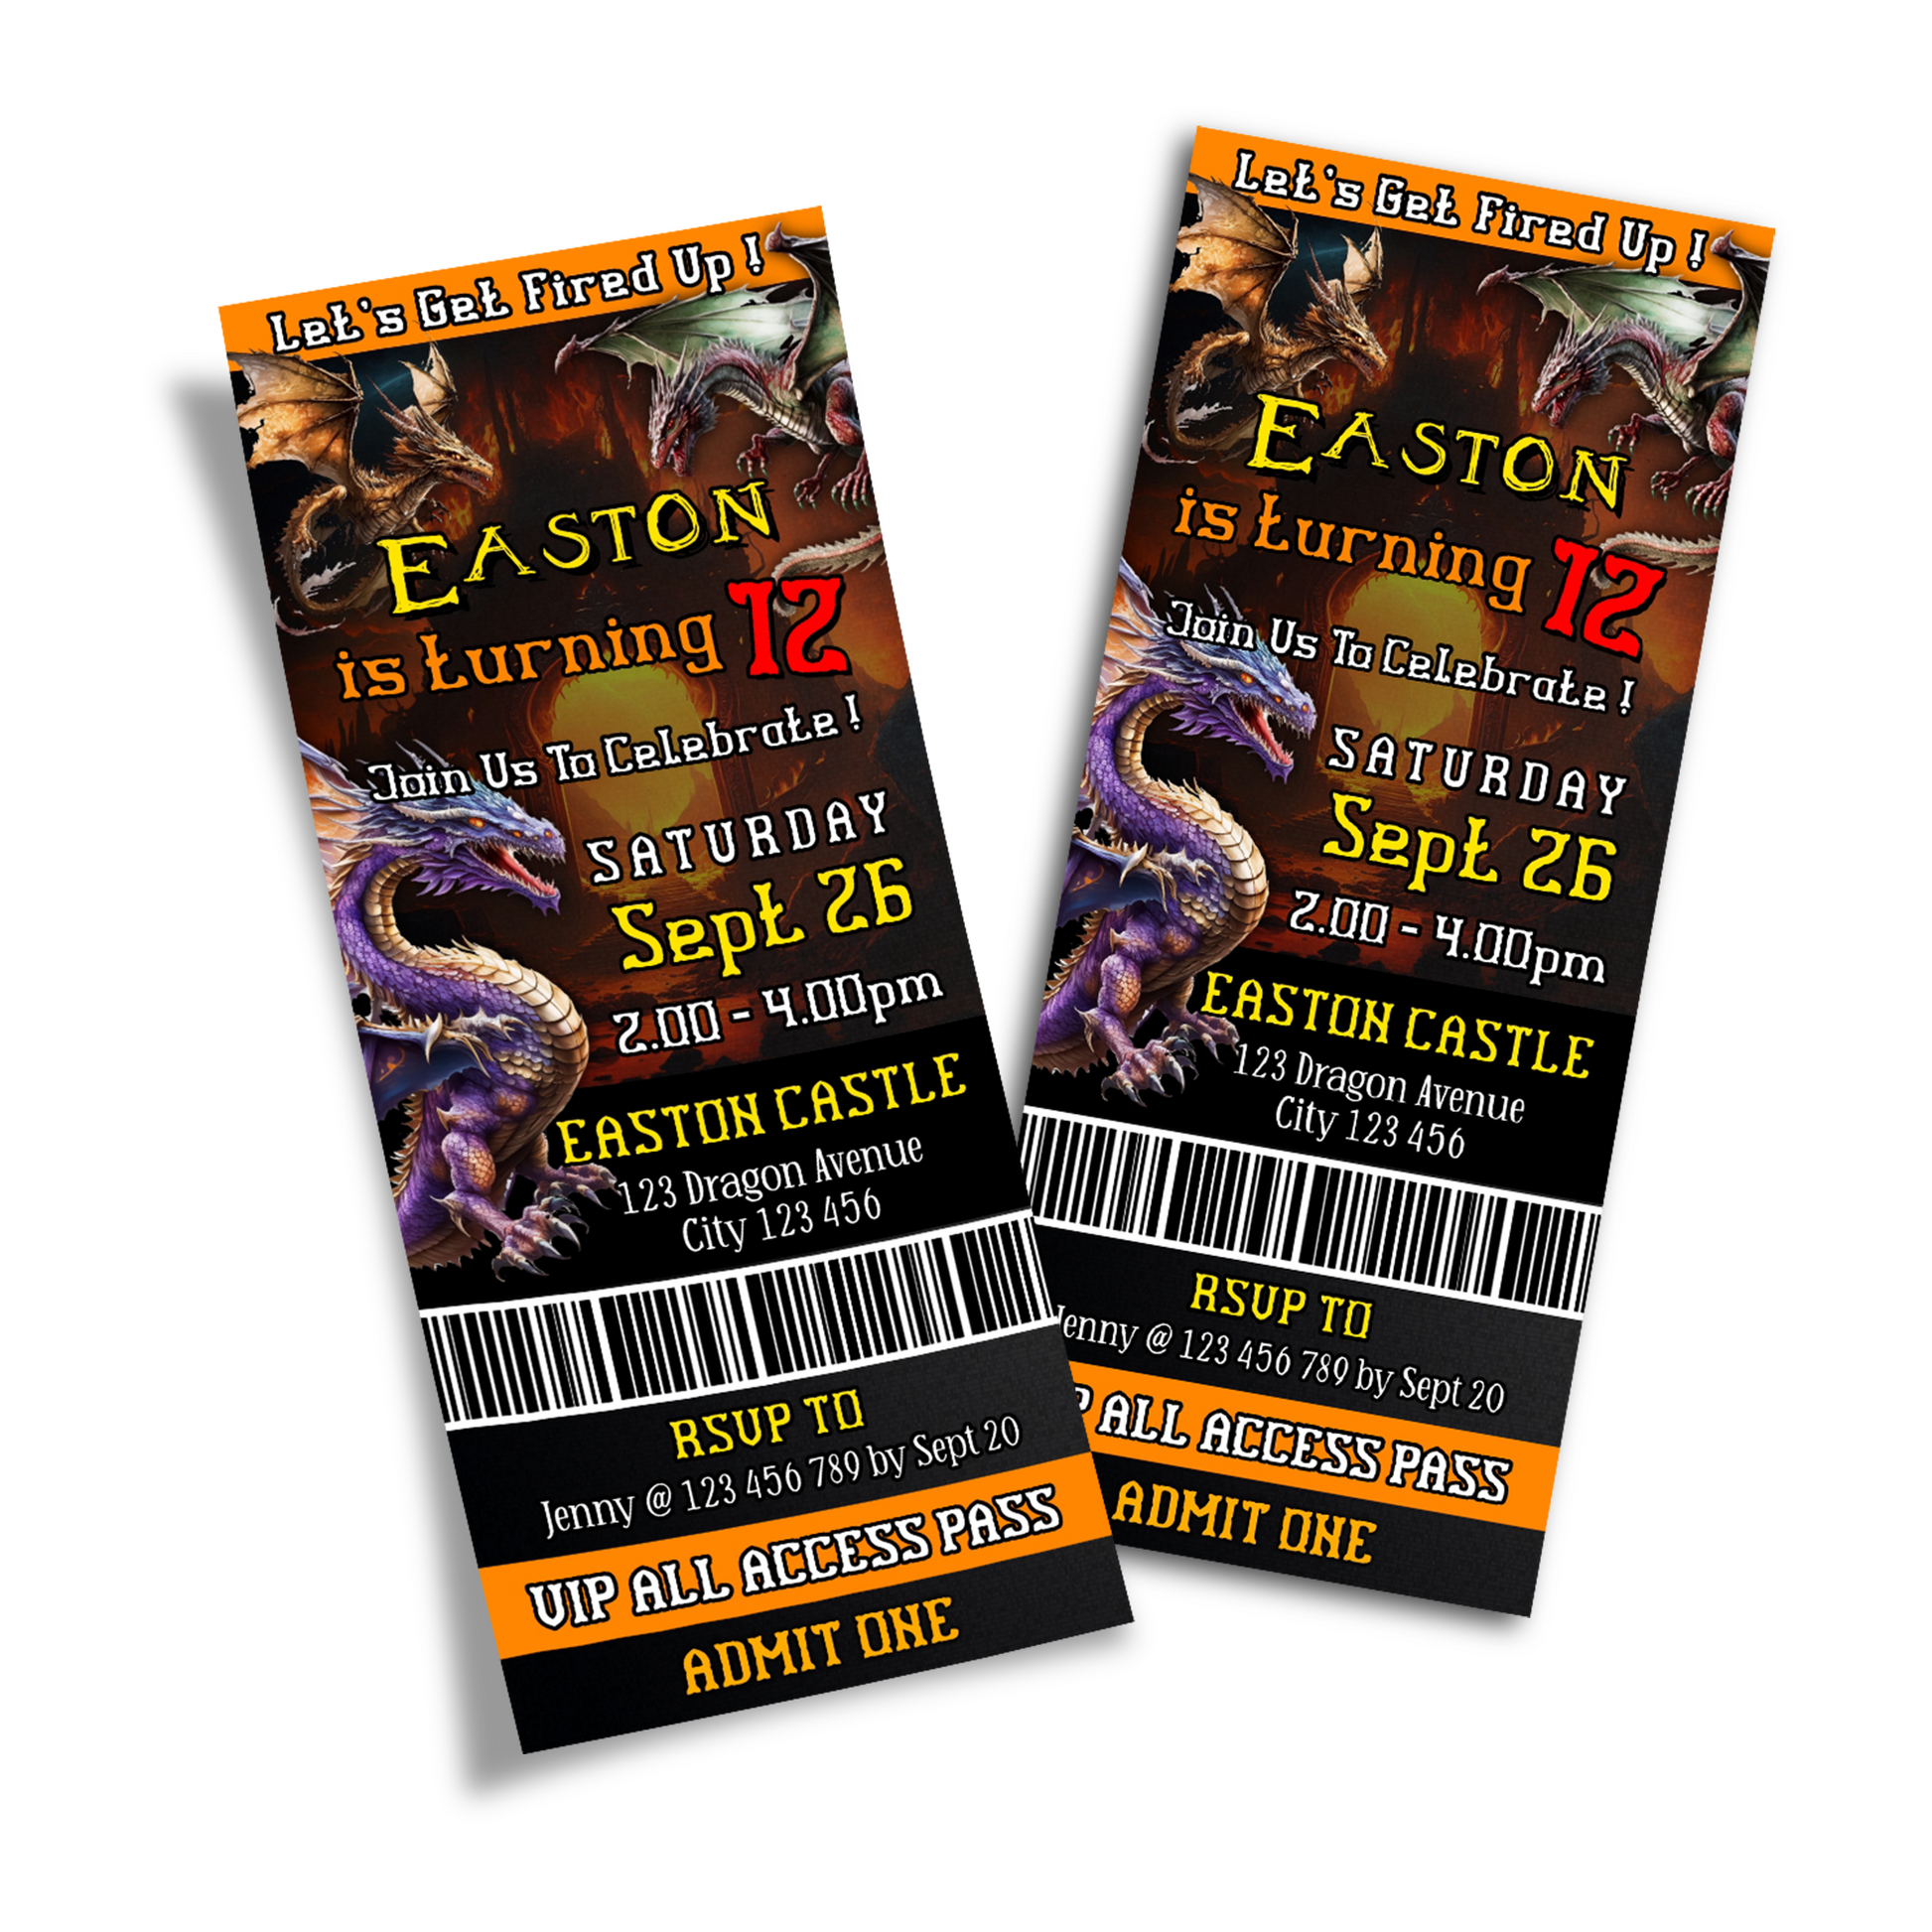 Personalized birthday ticket invitations with a Dragon theme